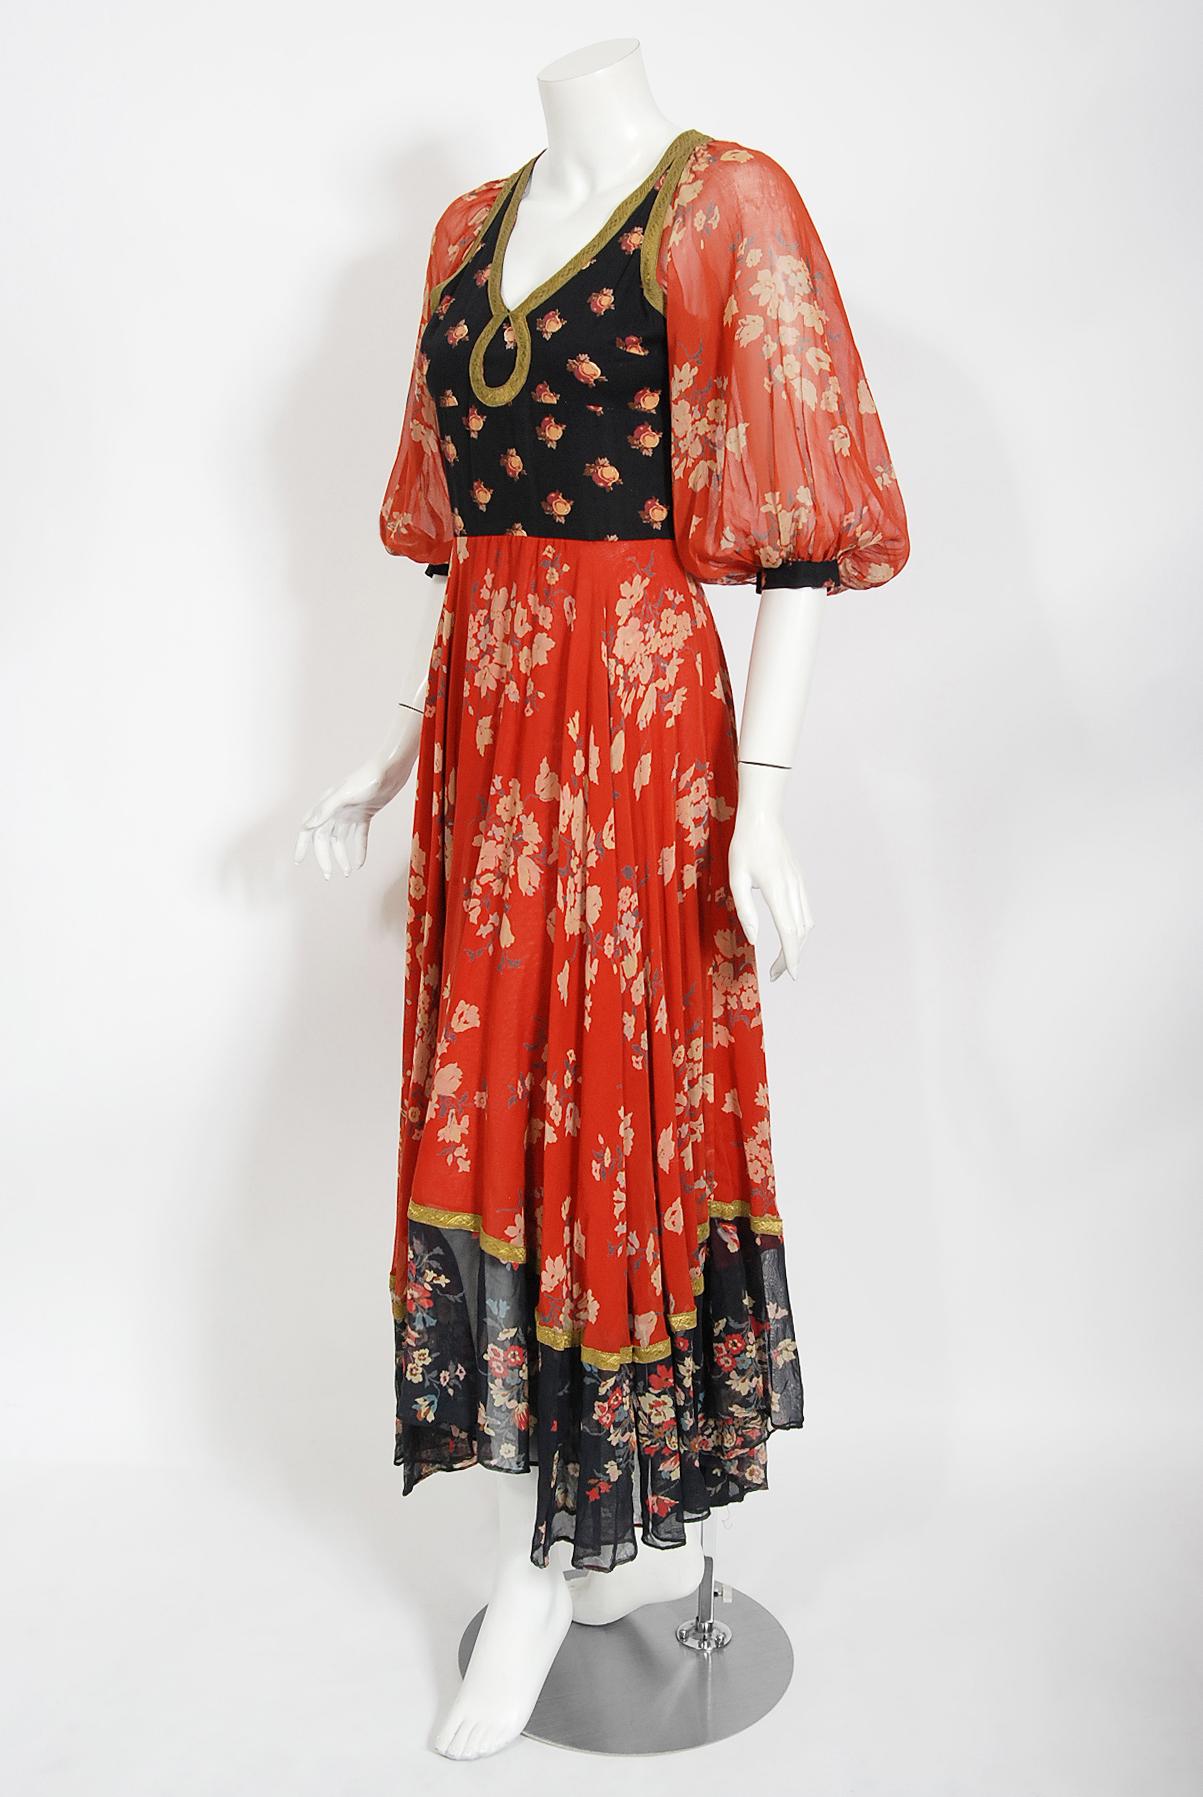 Vintage 1971 Thea Porter Documented Black & Red Floral Print Cotton Gypsy Dress  1